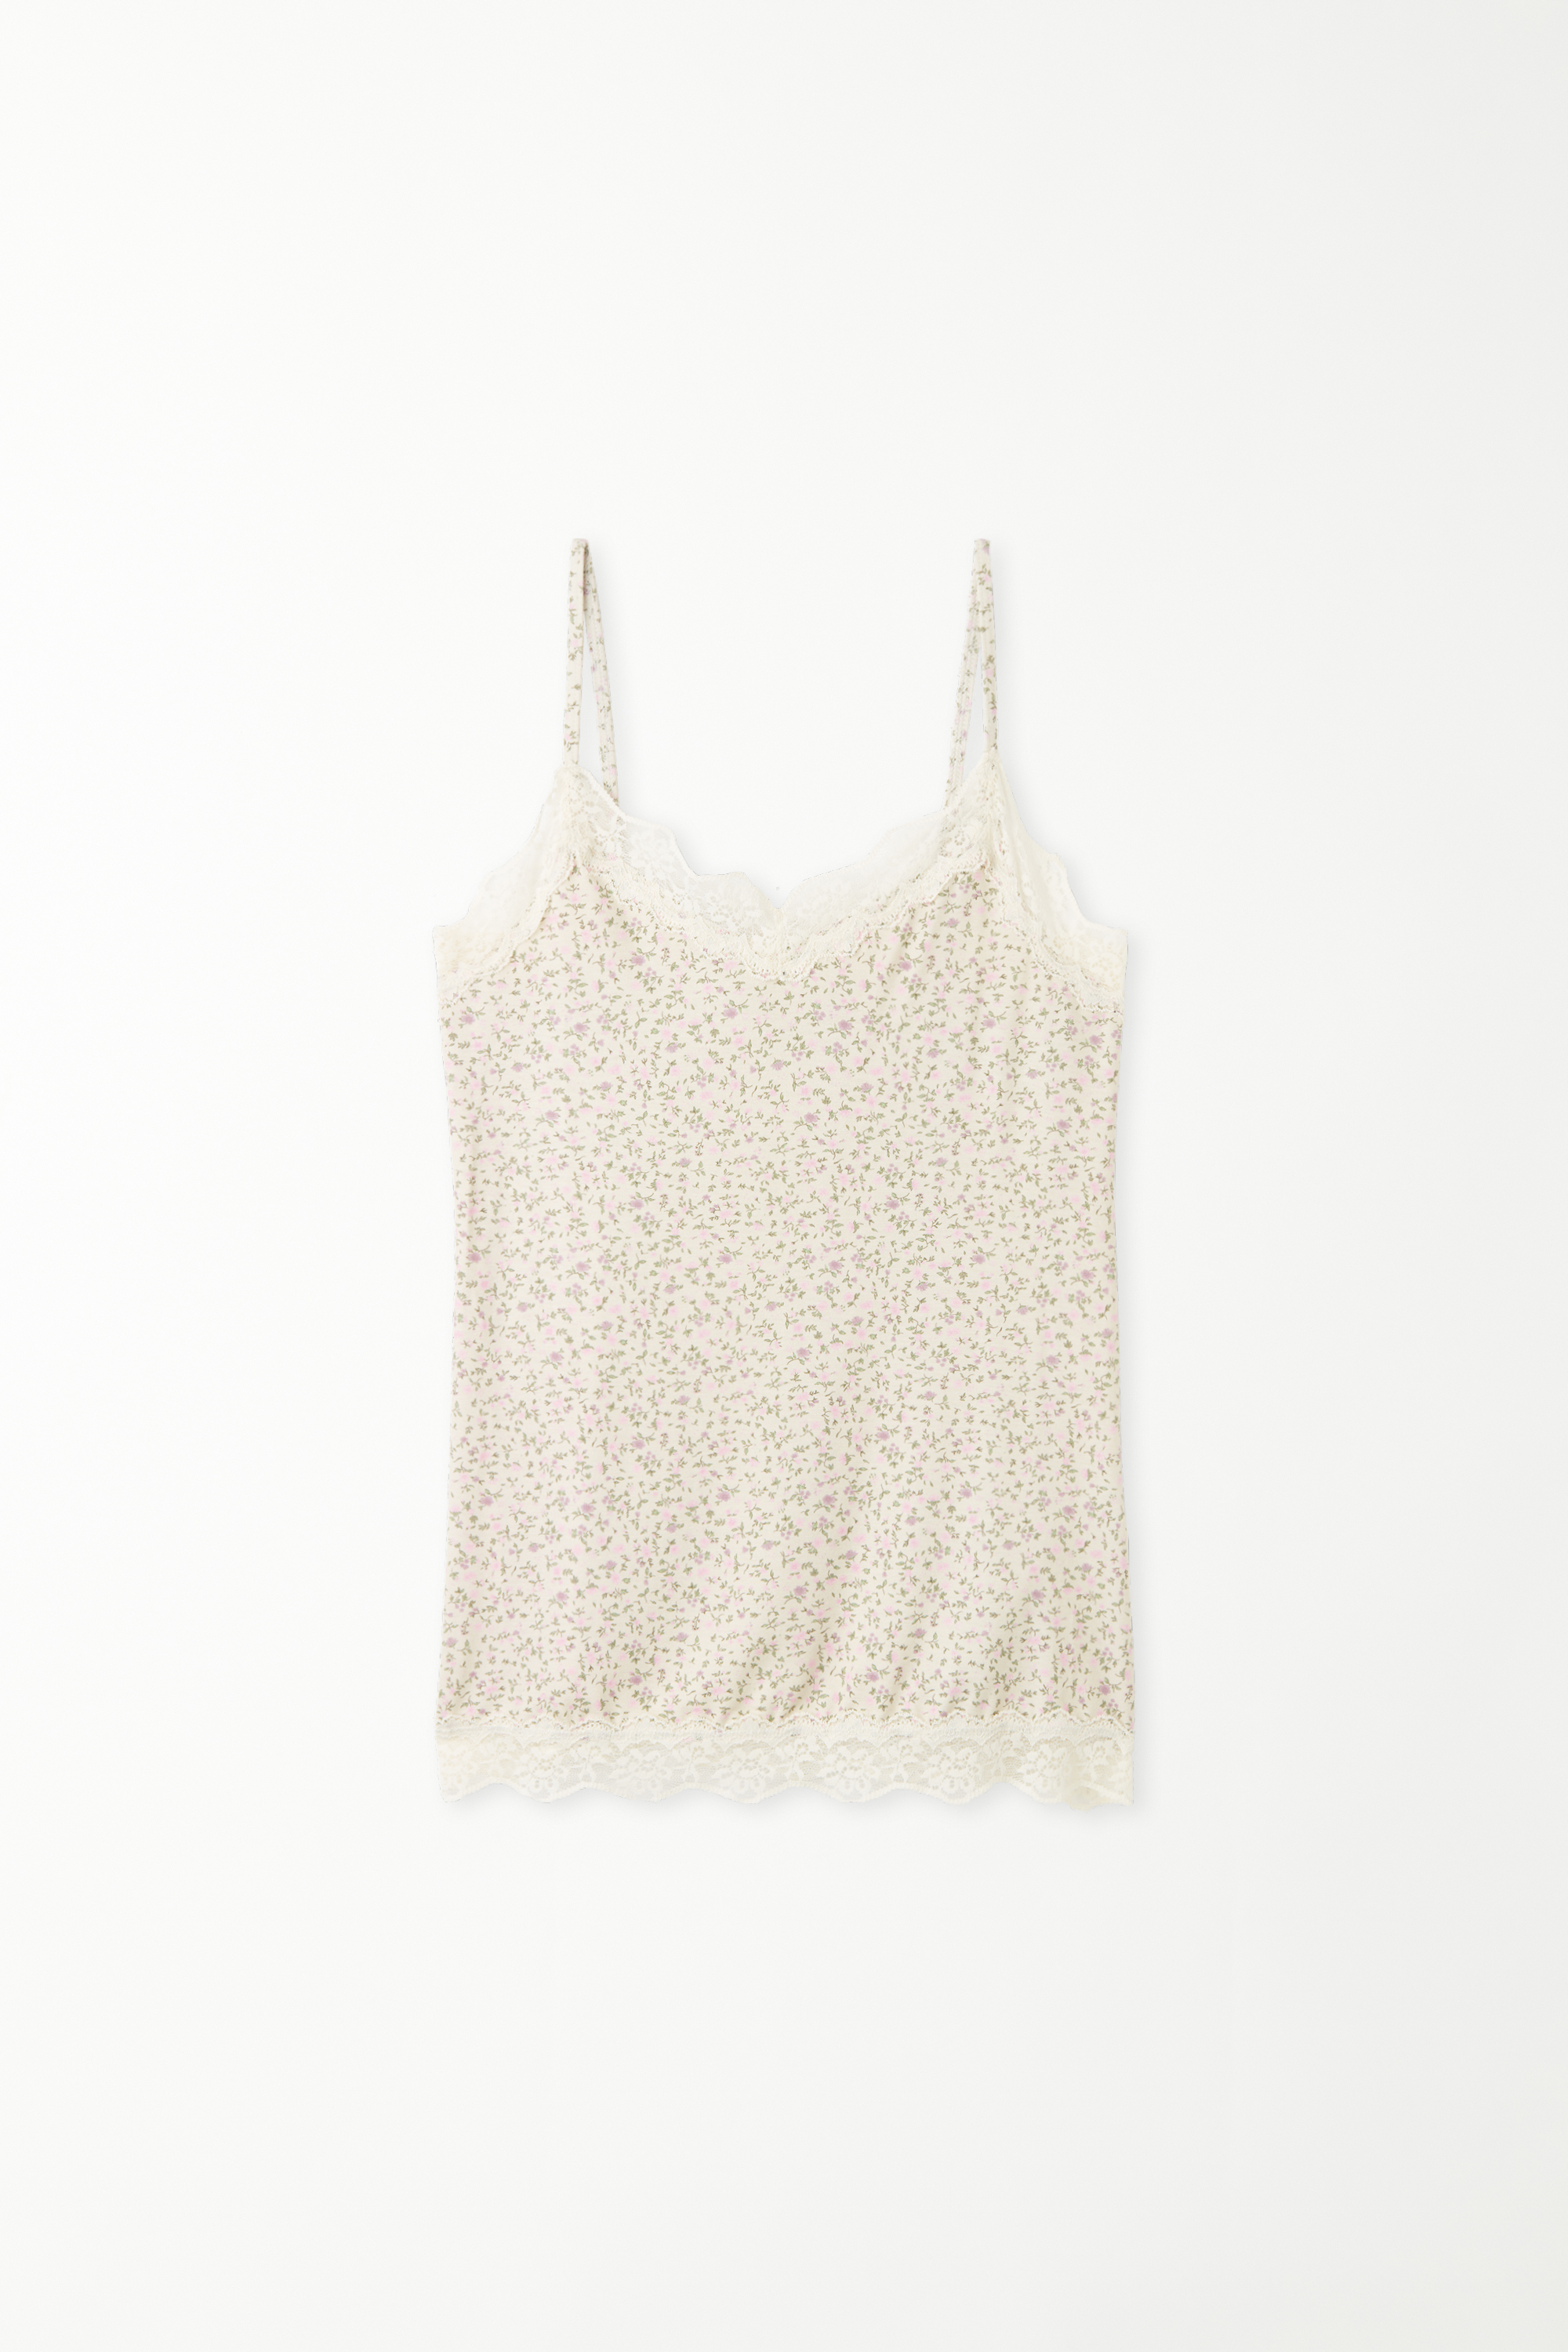 V Neck Tank Top with Lace Insert